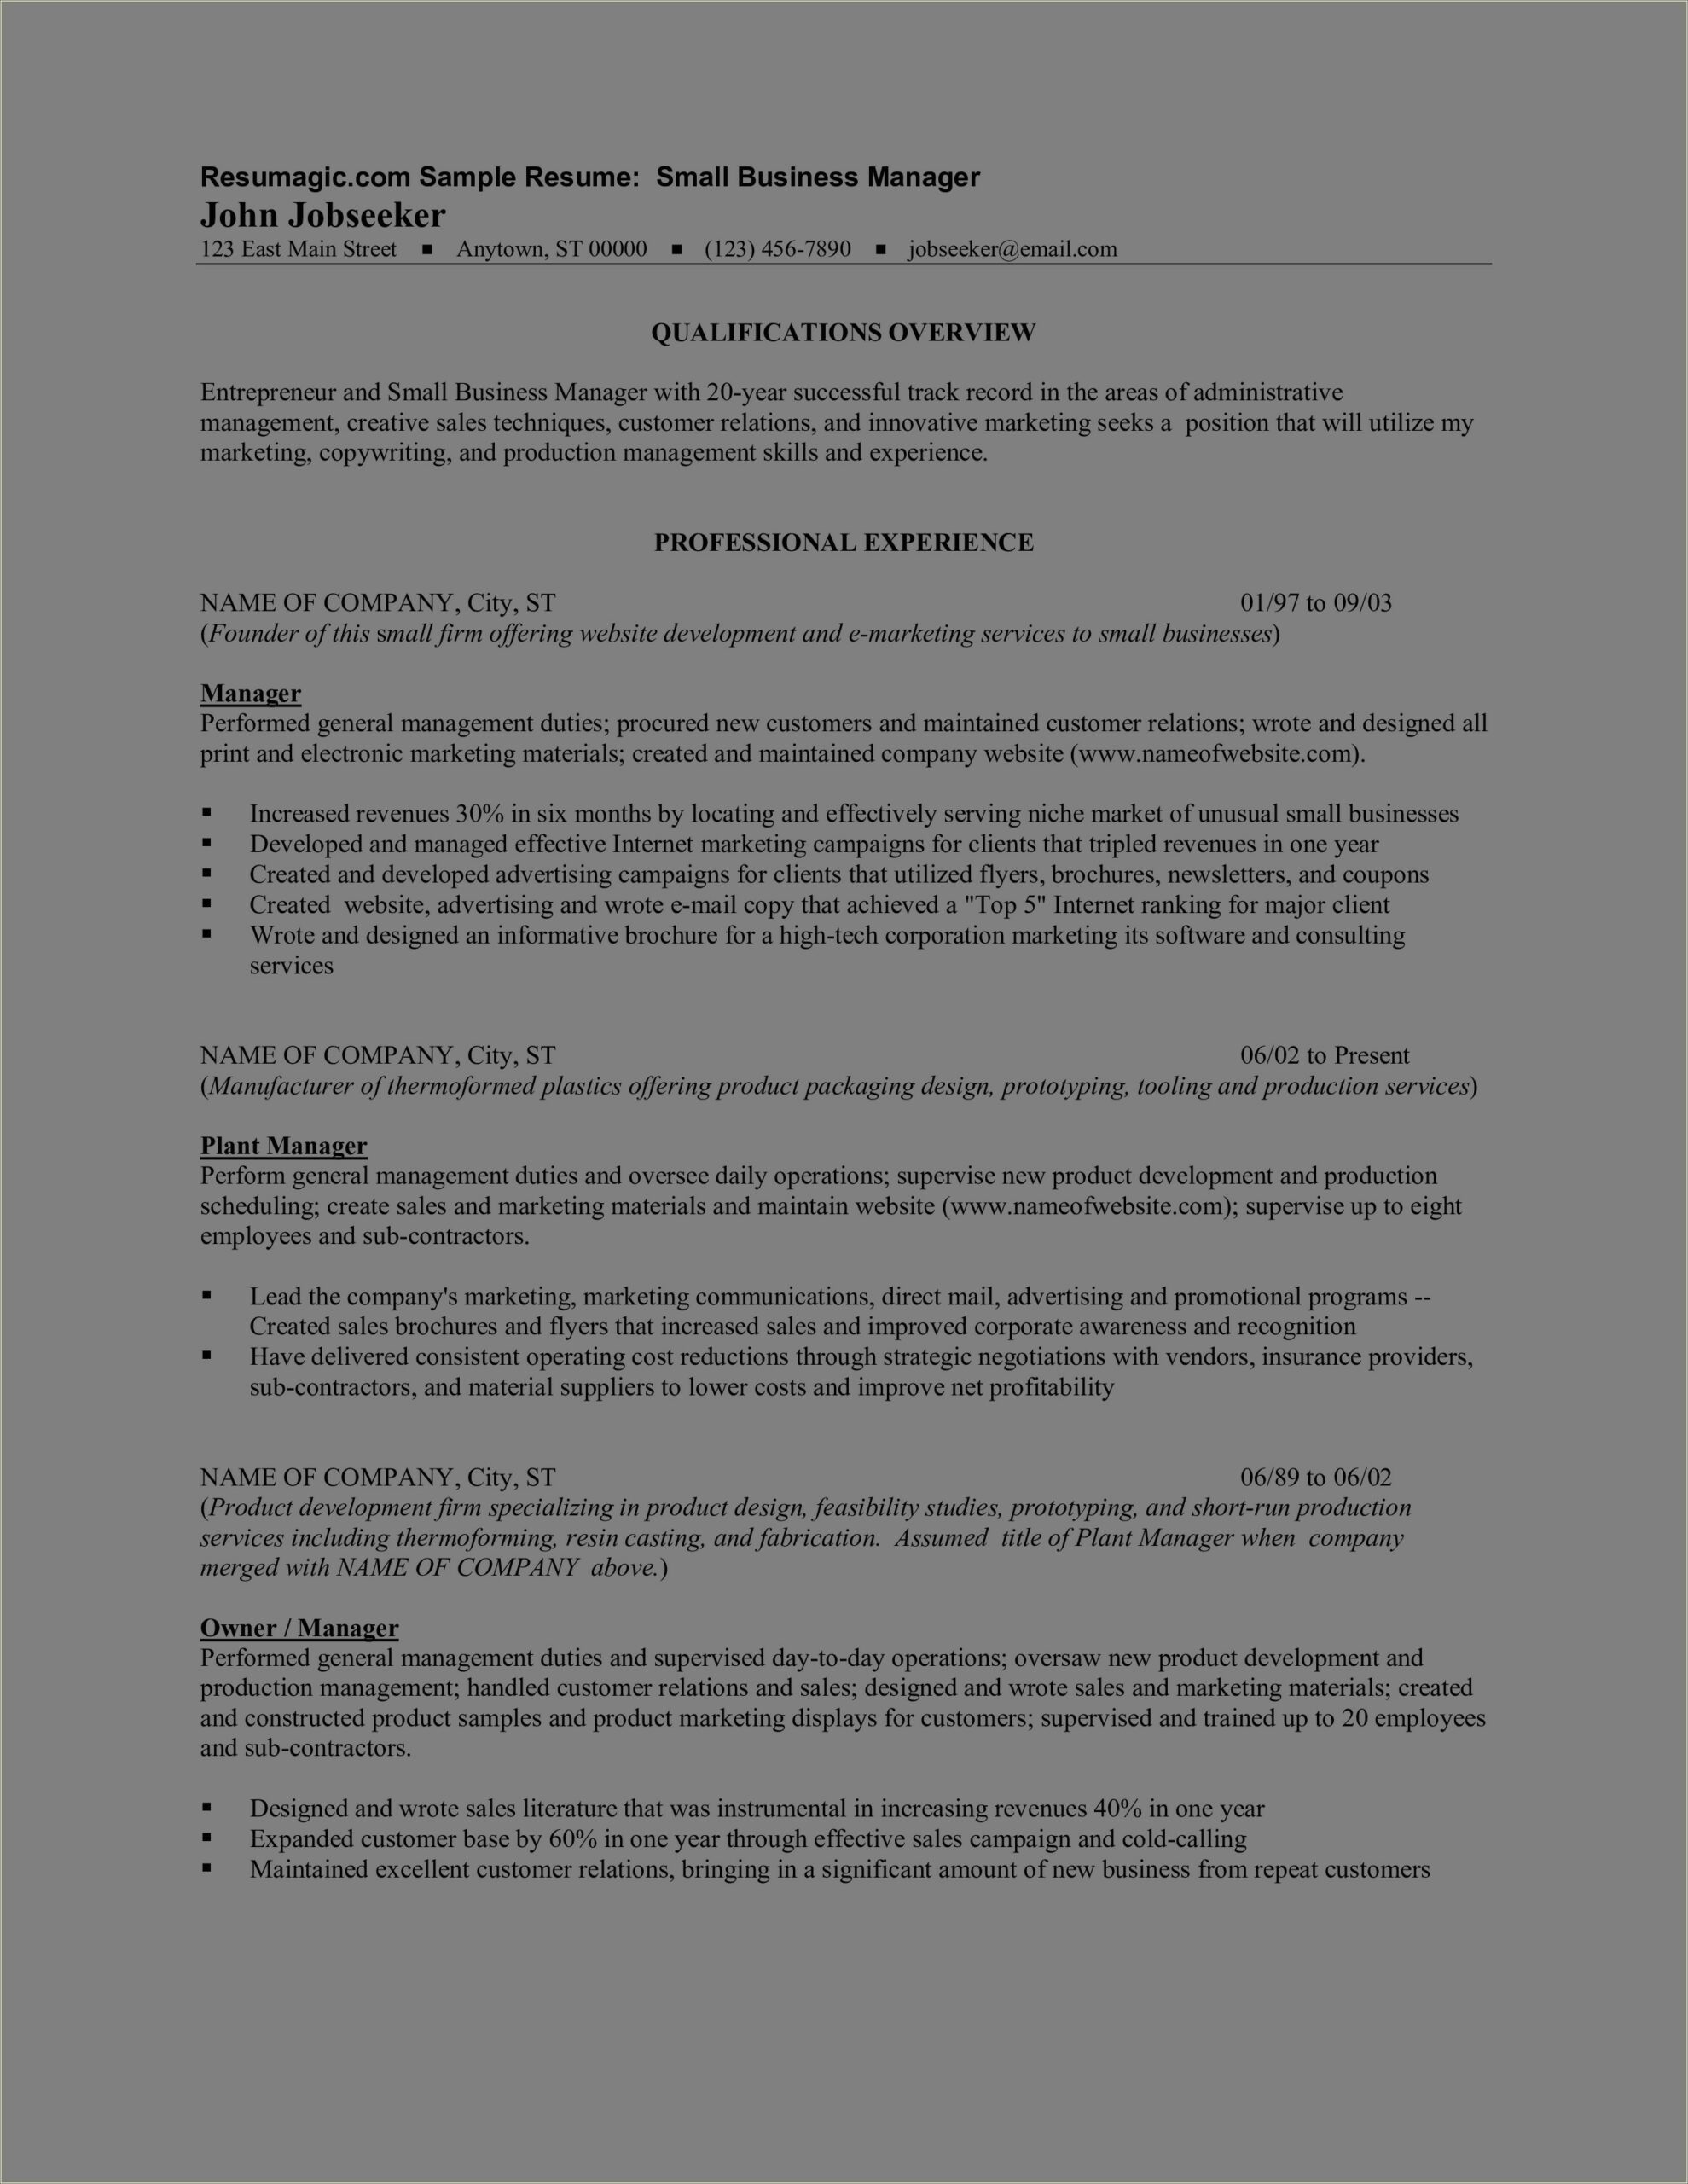 Sample Resume Of Product Development Manager